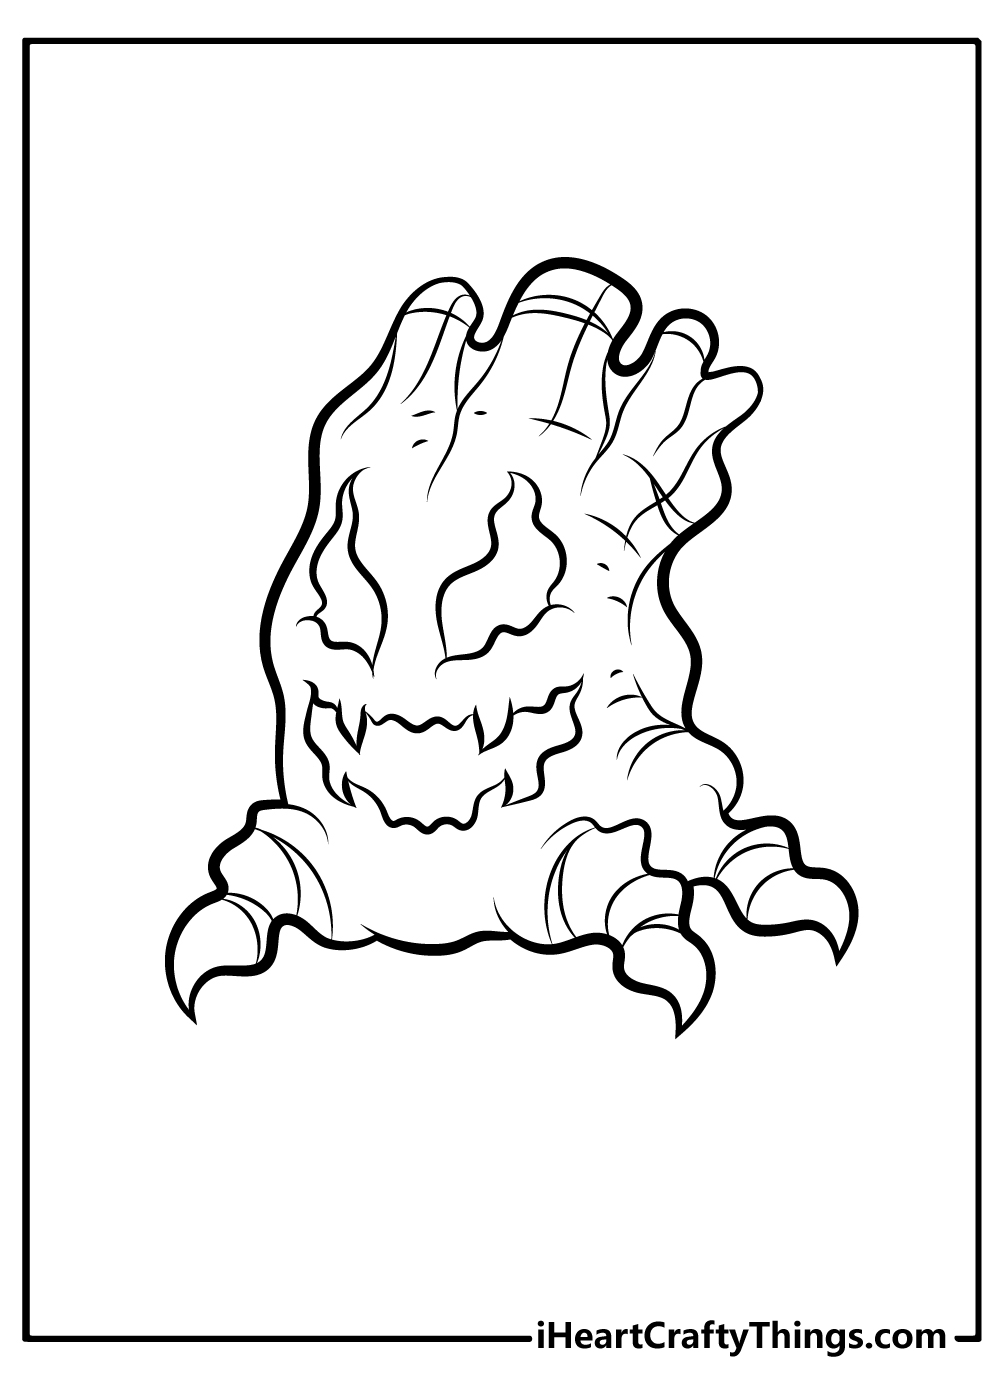 Monster Coloring Pages free printable for preschoolers